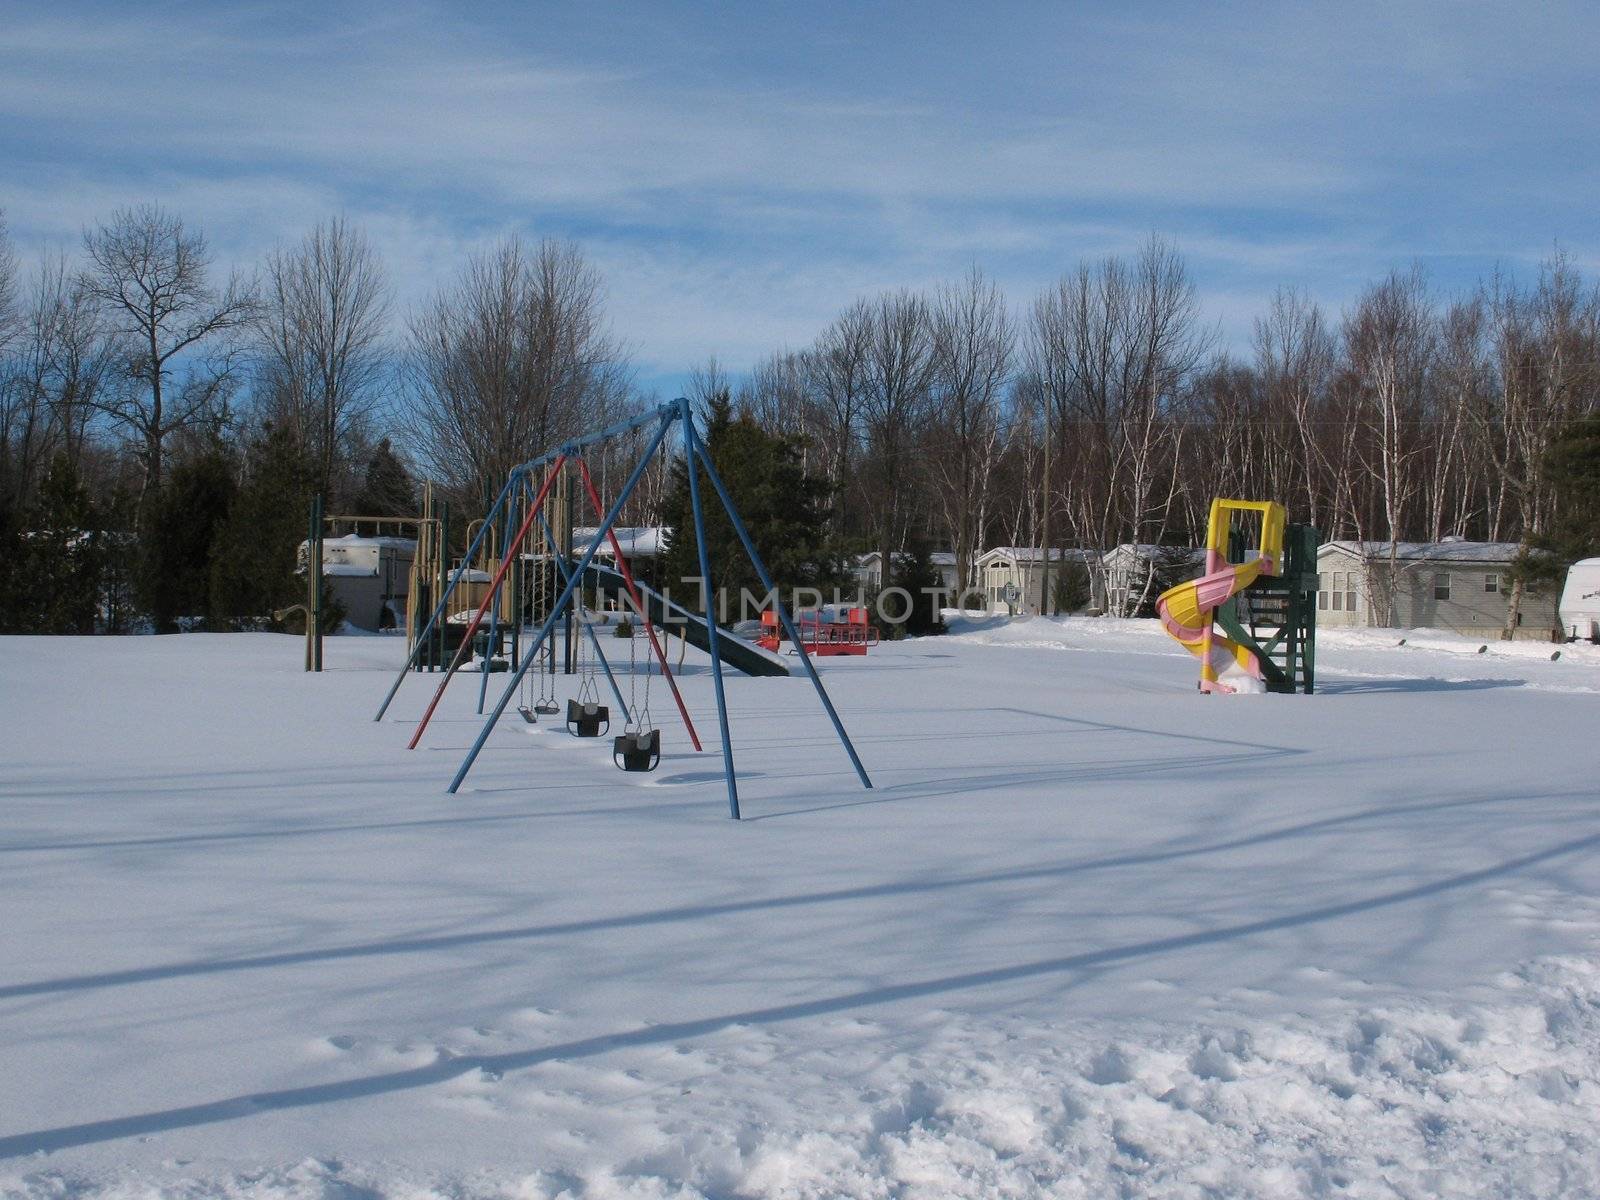 A playground in the winter